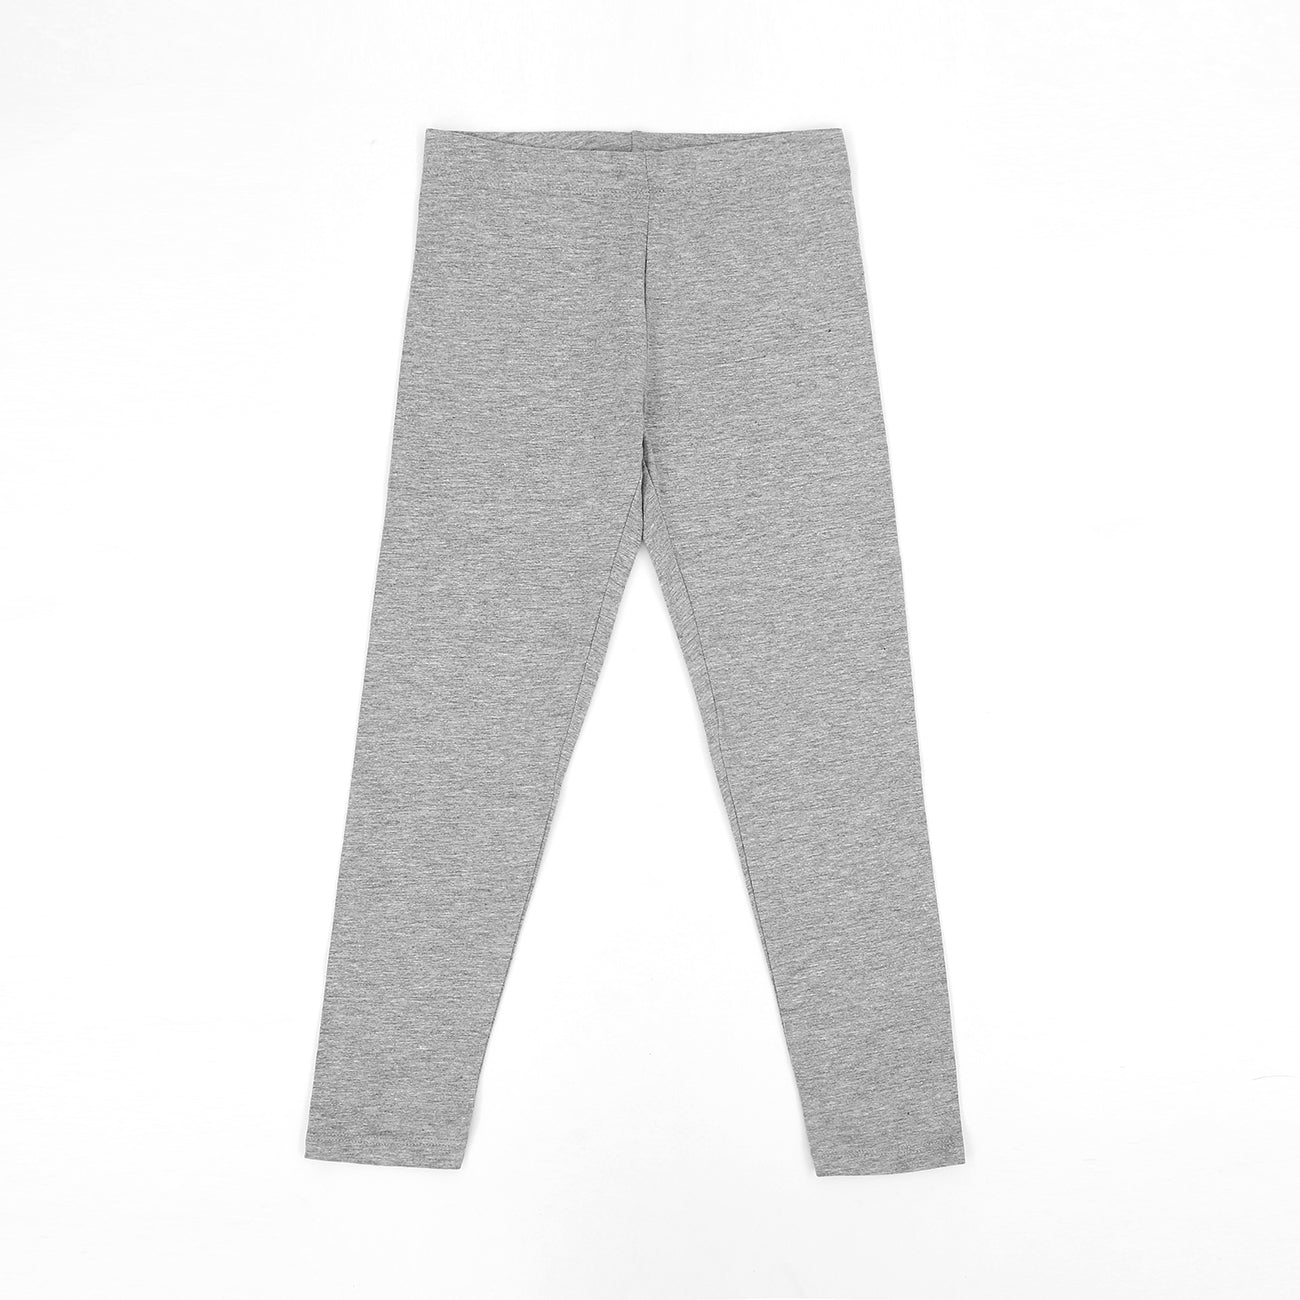 Imported Grey Soft Cotton Stretch Legging For Girls (11574)